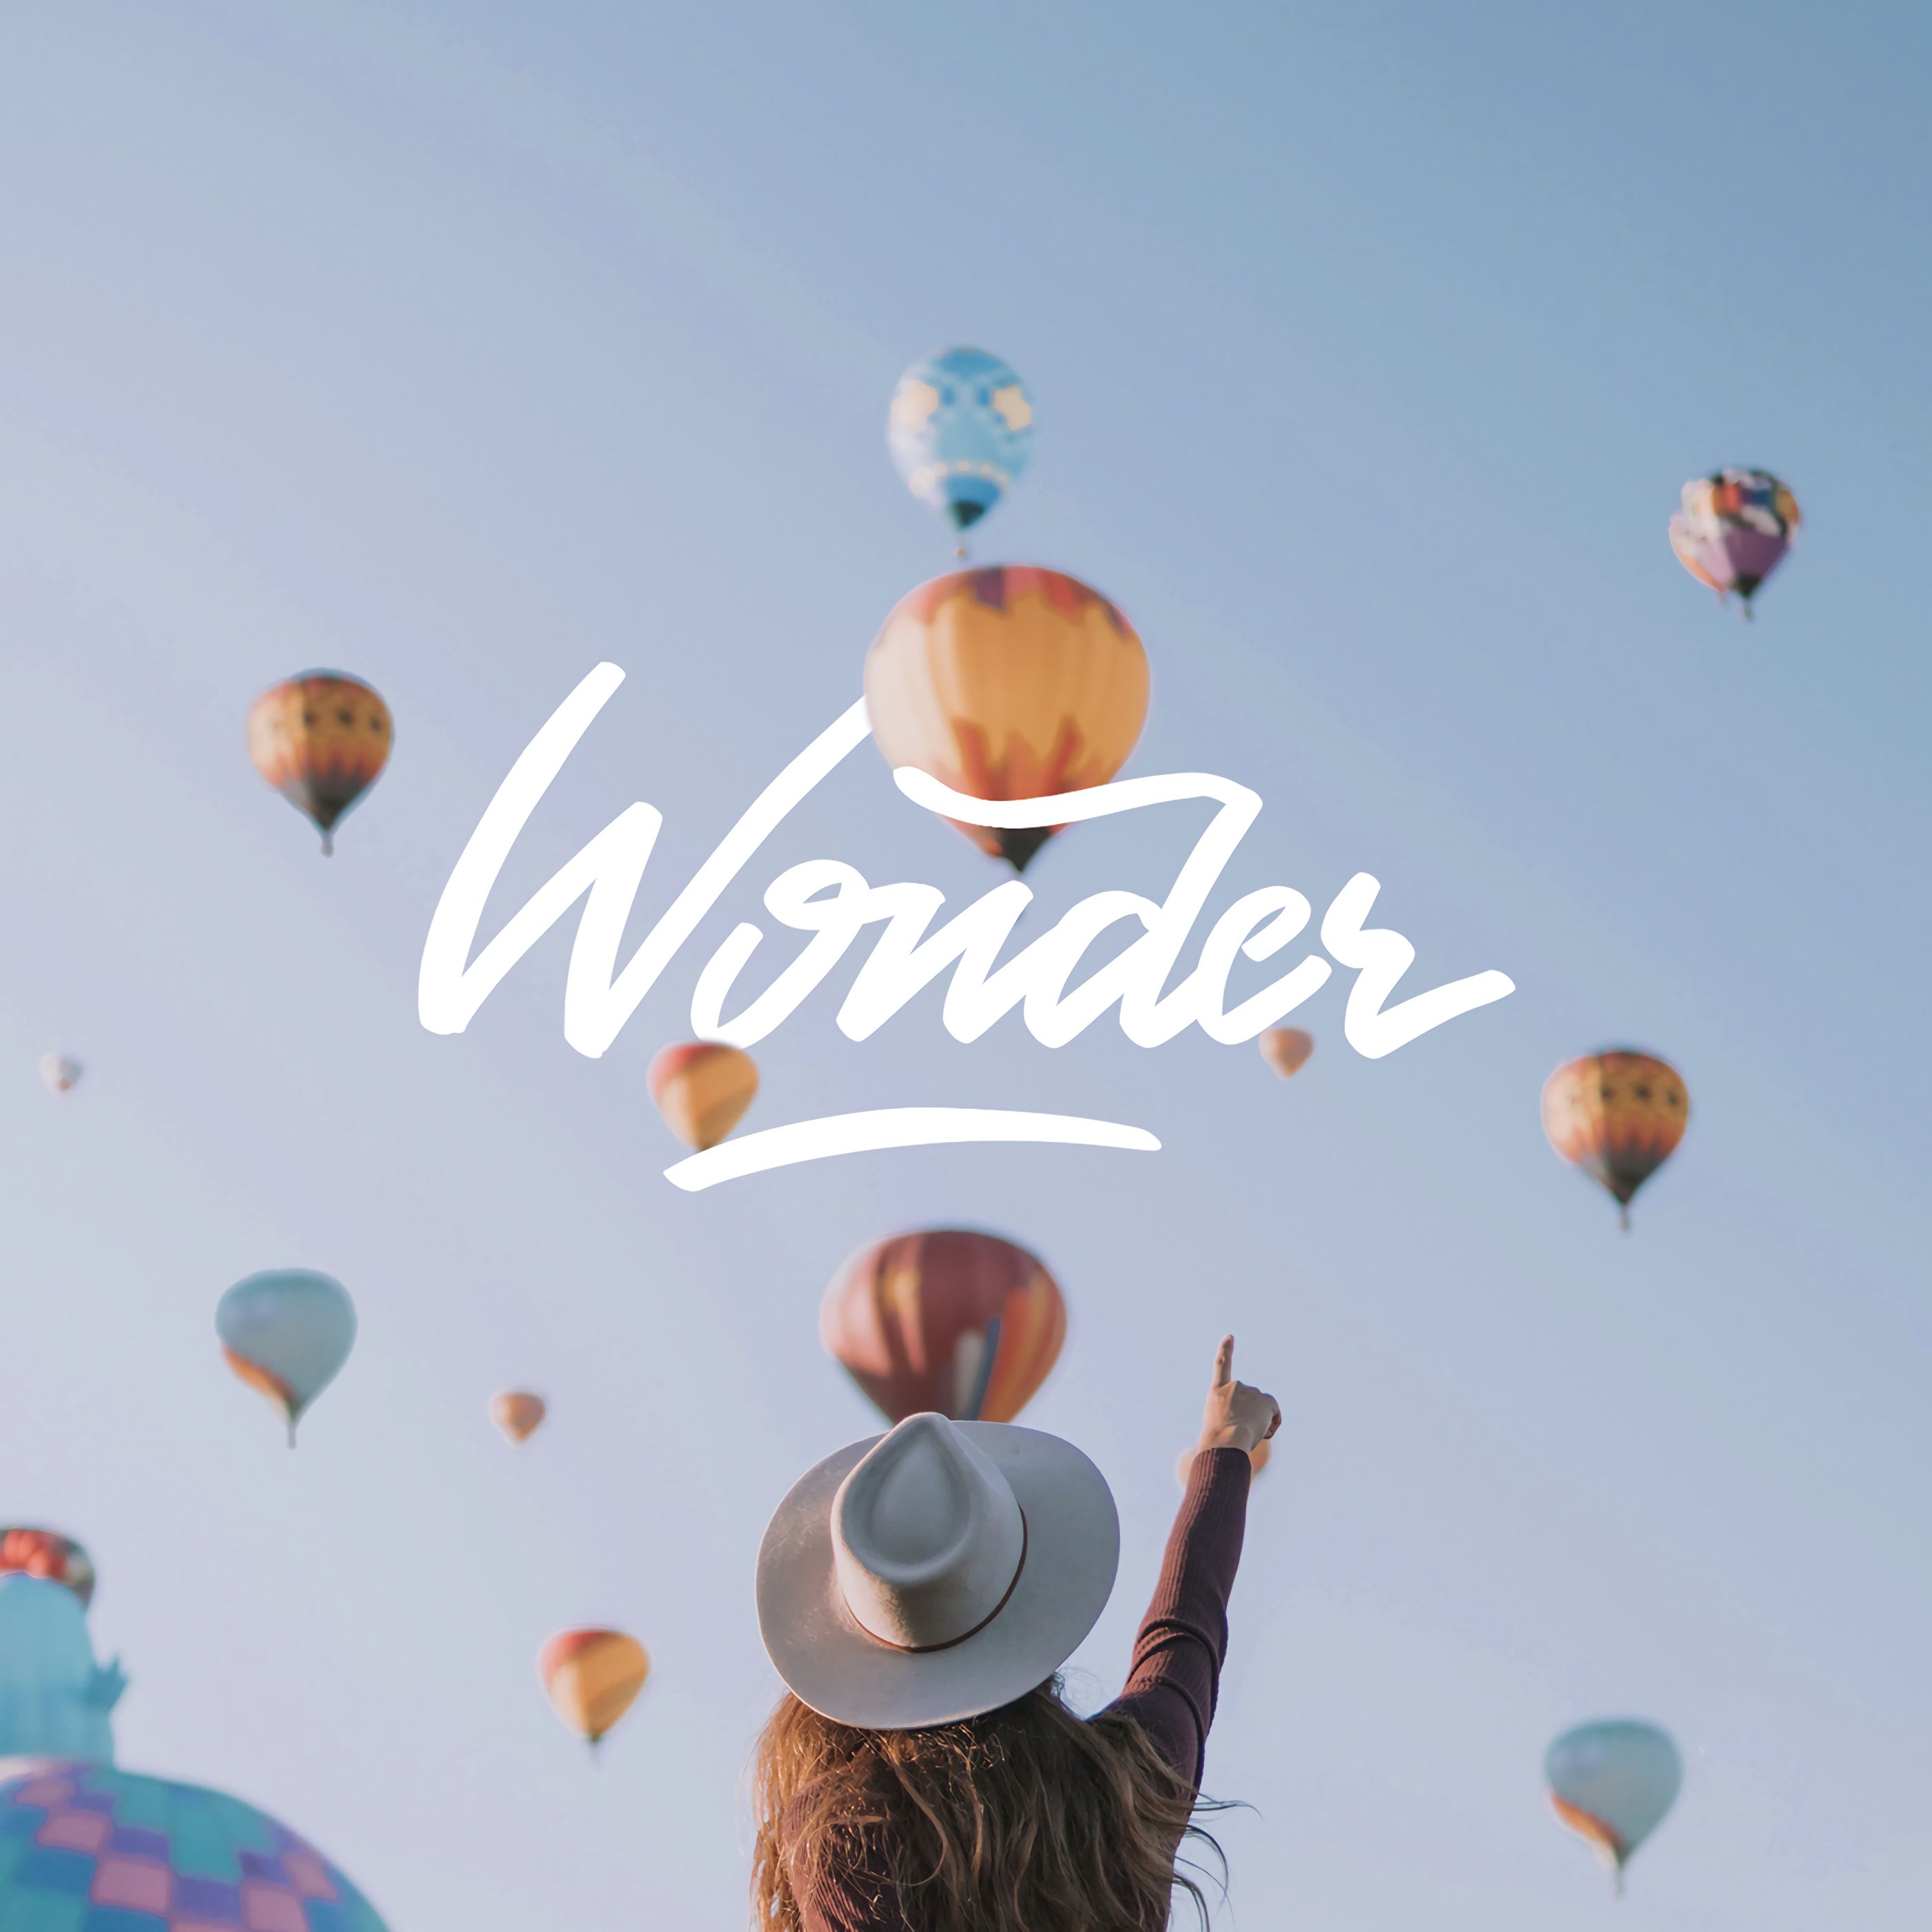 114124 download wallpaper words, sky, balloons, girl, inscription, hat, surprise, astonishment screensavers and pictures for free